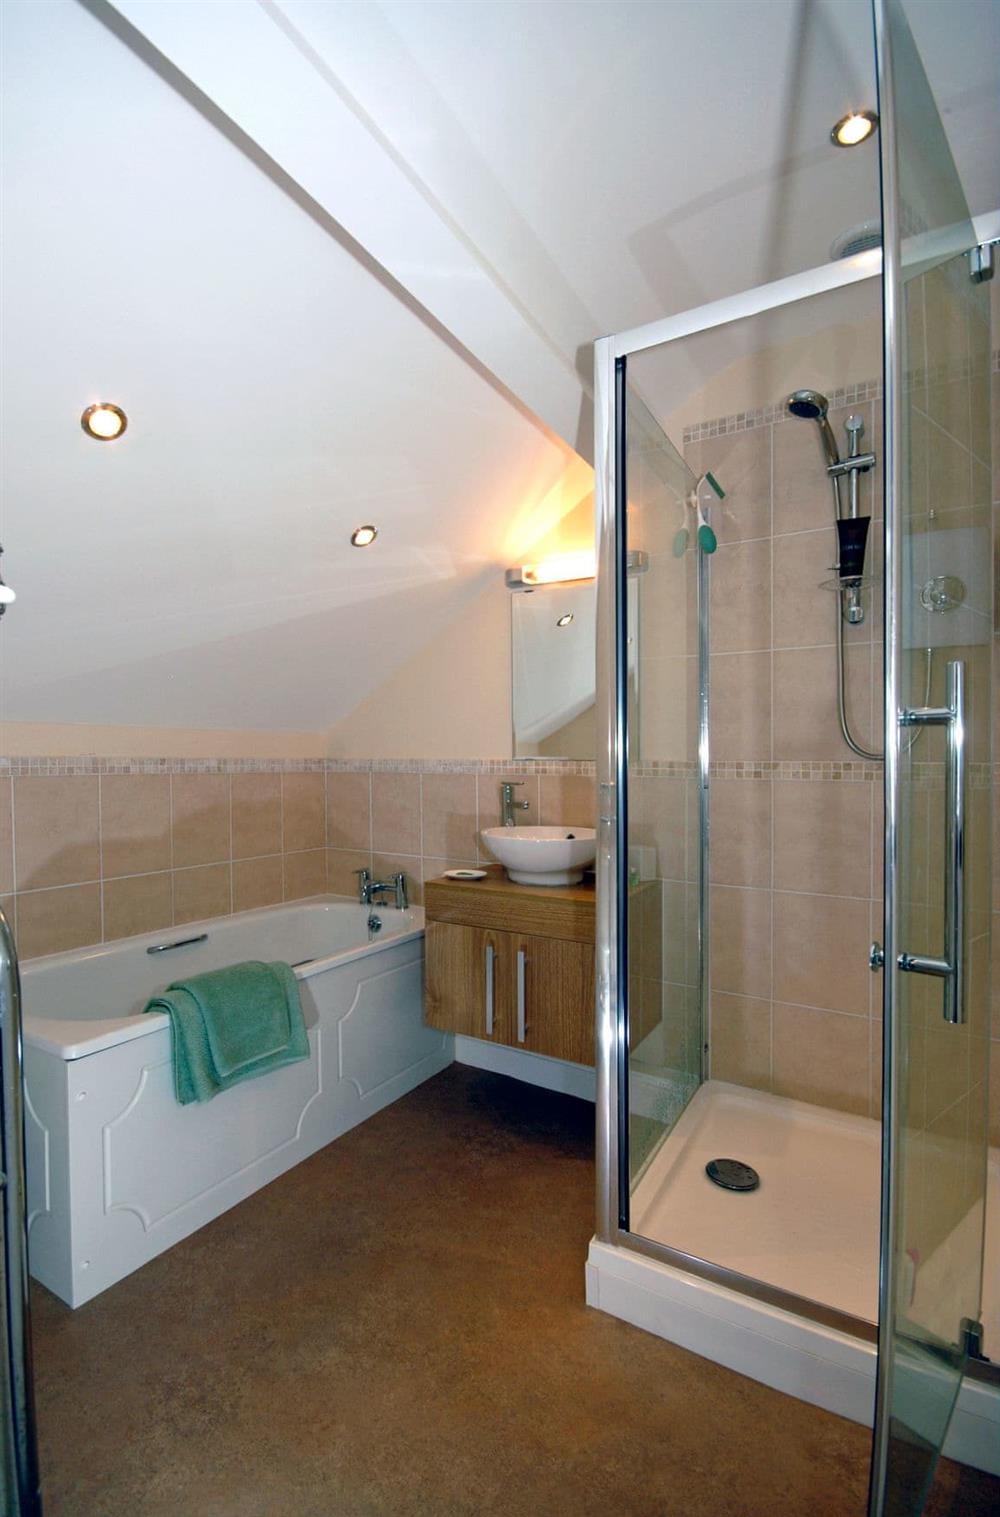 This is the bathroom at Seascape in New Quay, Cardigan and Ceredigion, Dyfed